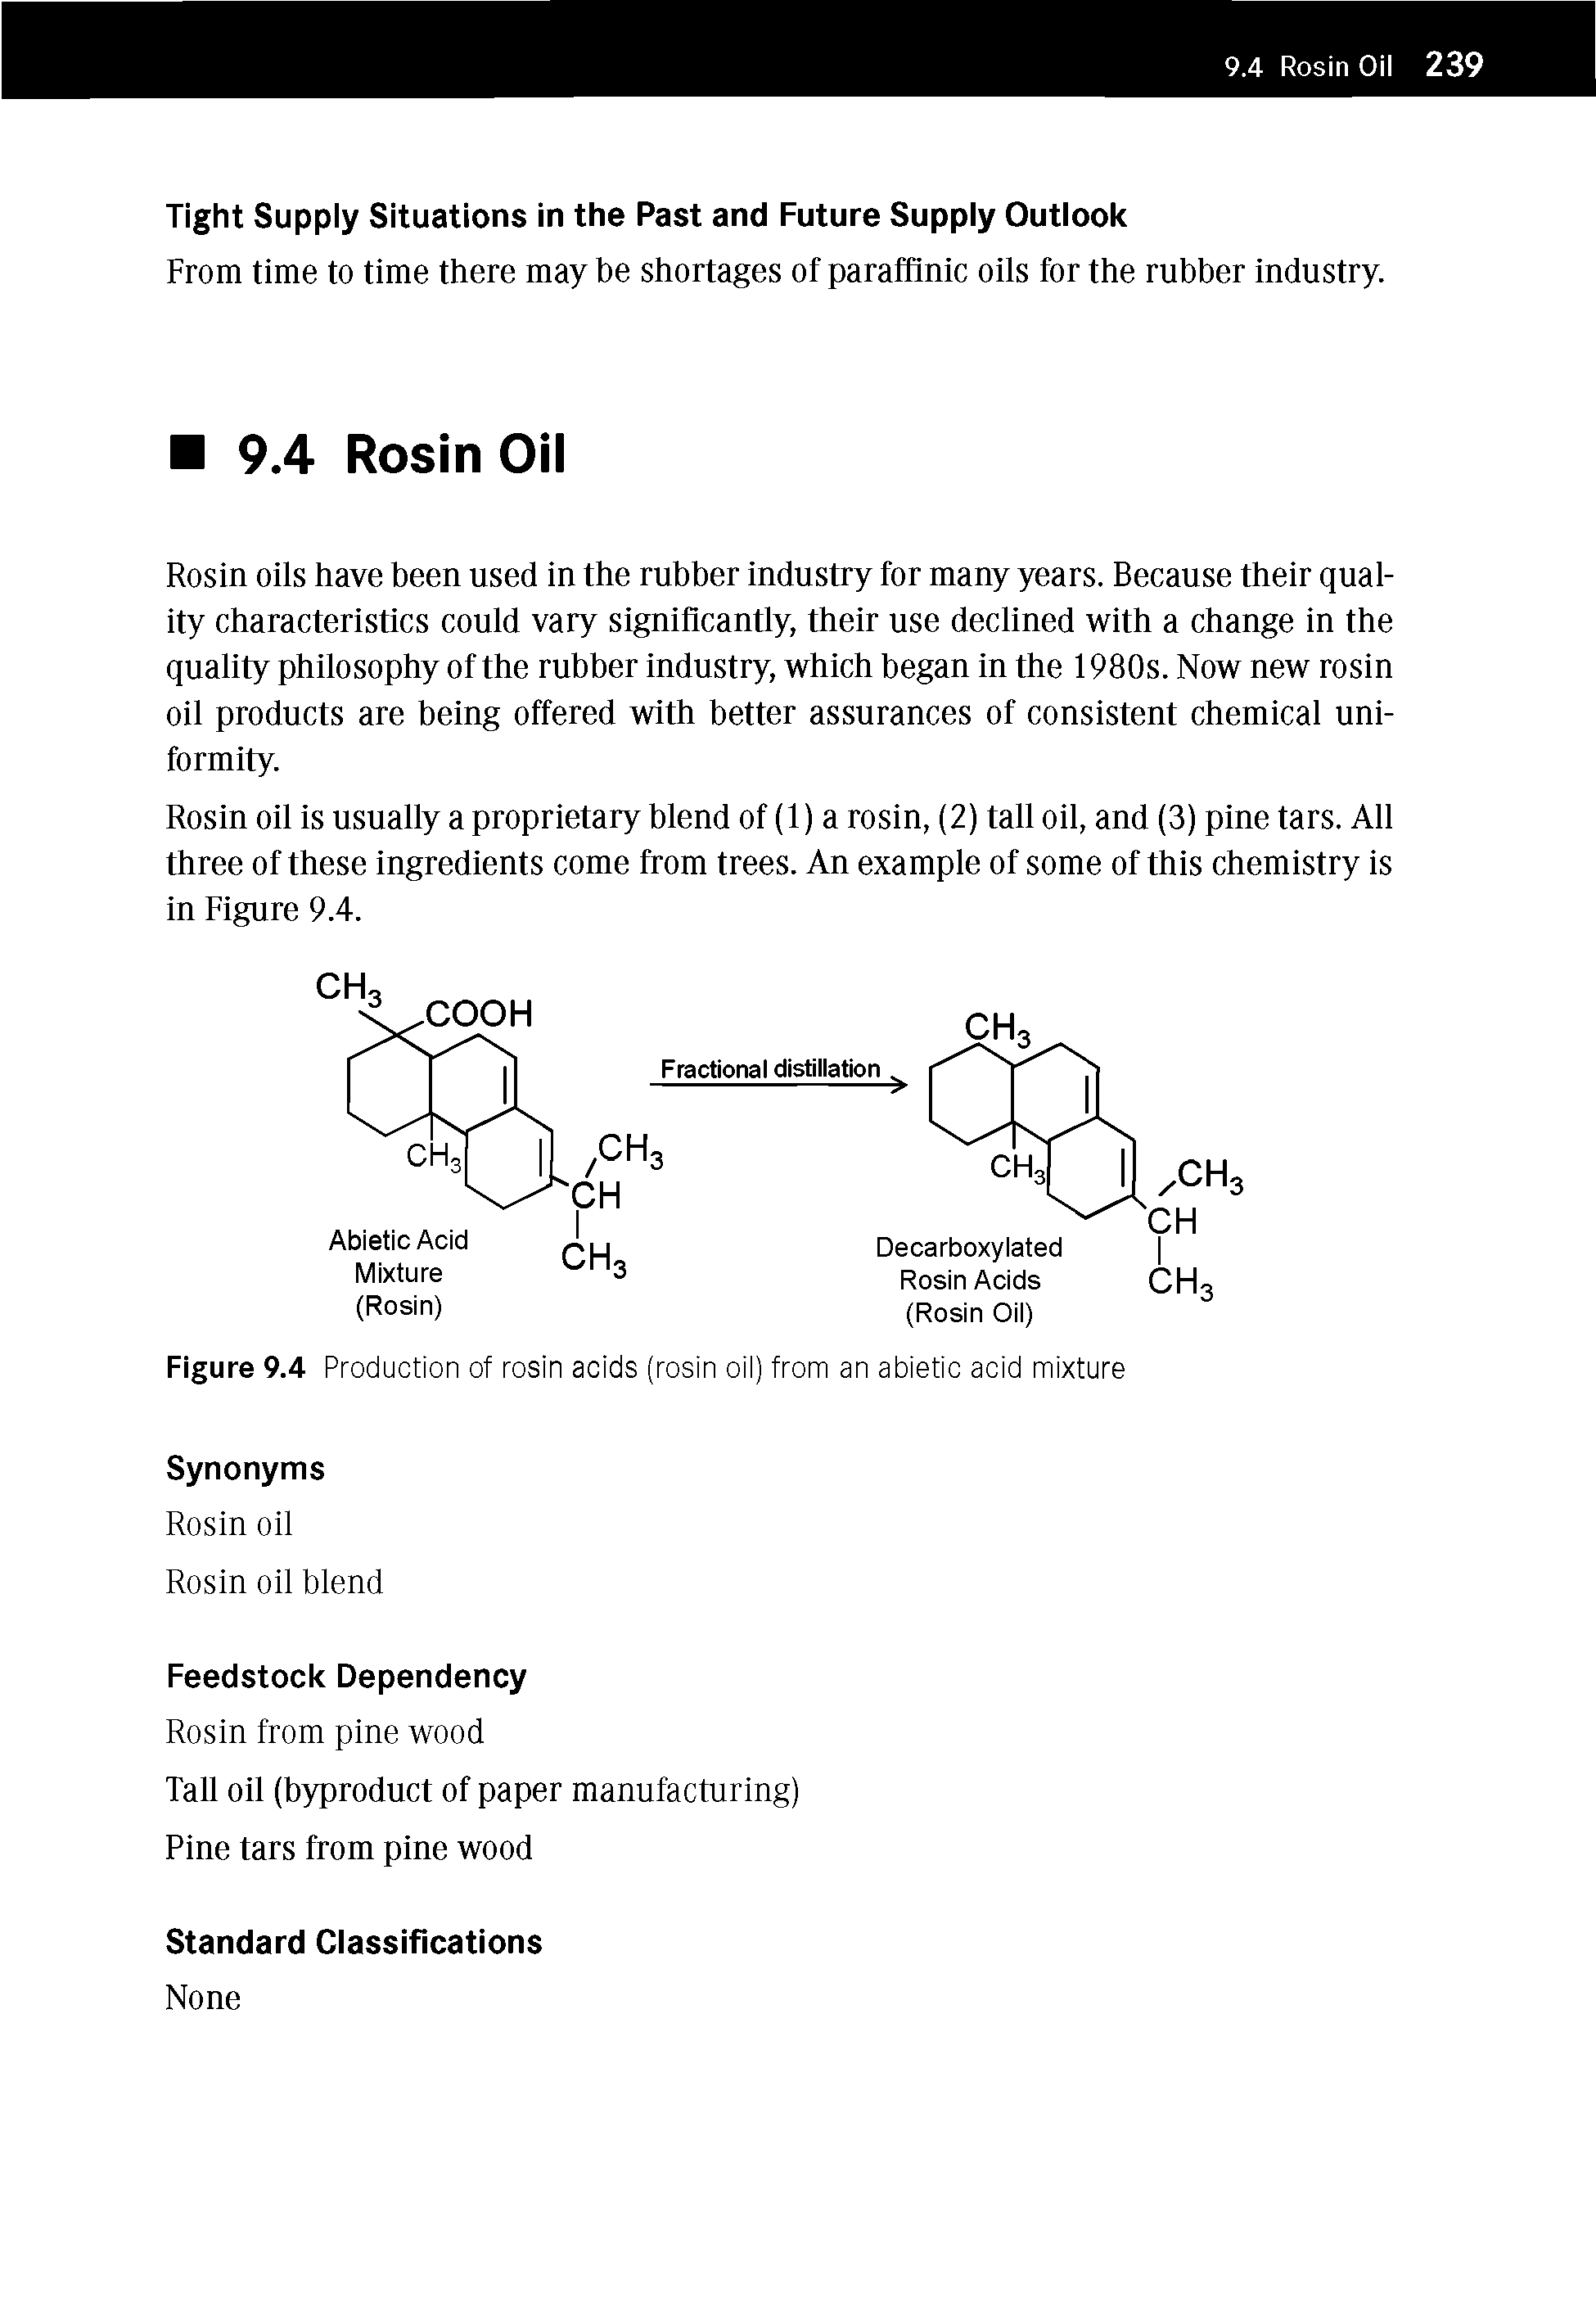 Figure 9.4 Production of rosin acids (rosin oil) from an abietic acid mixture...